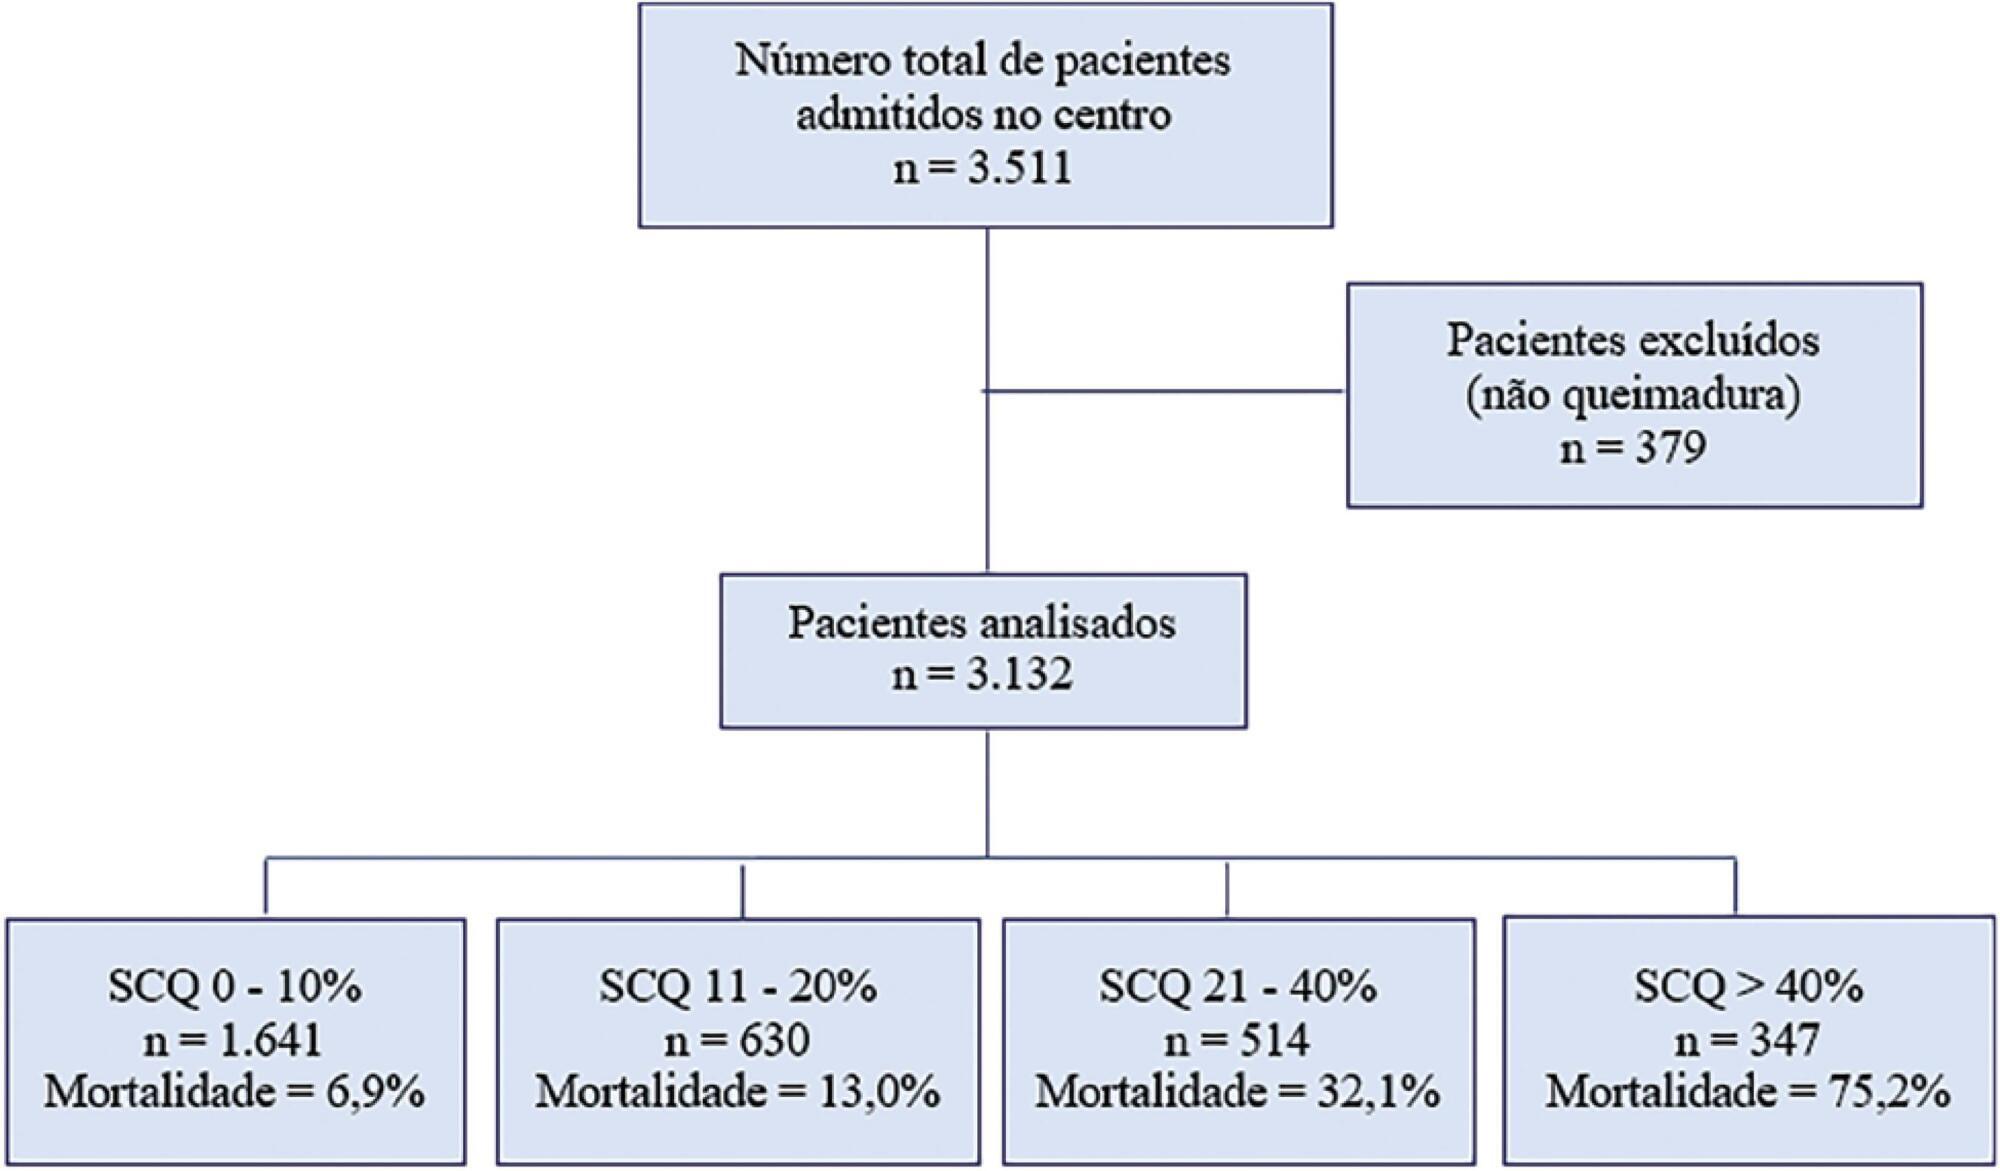 Mortality analysis of adult burn patients in Uruguay